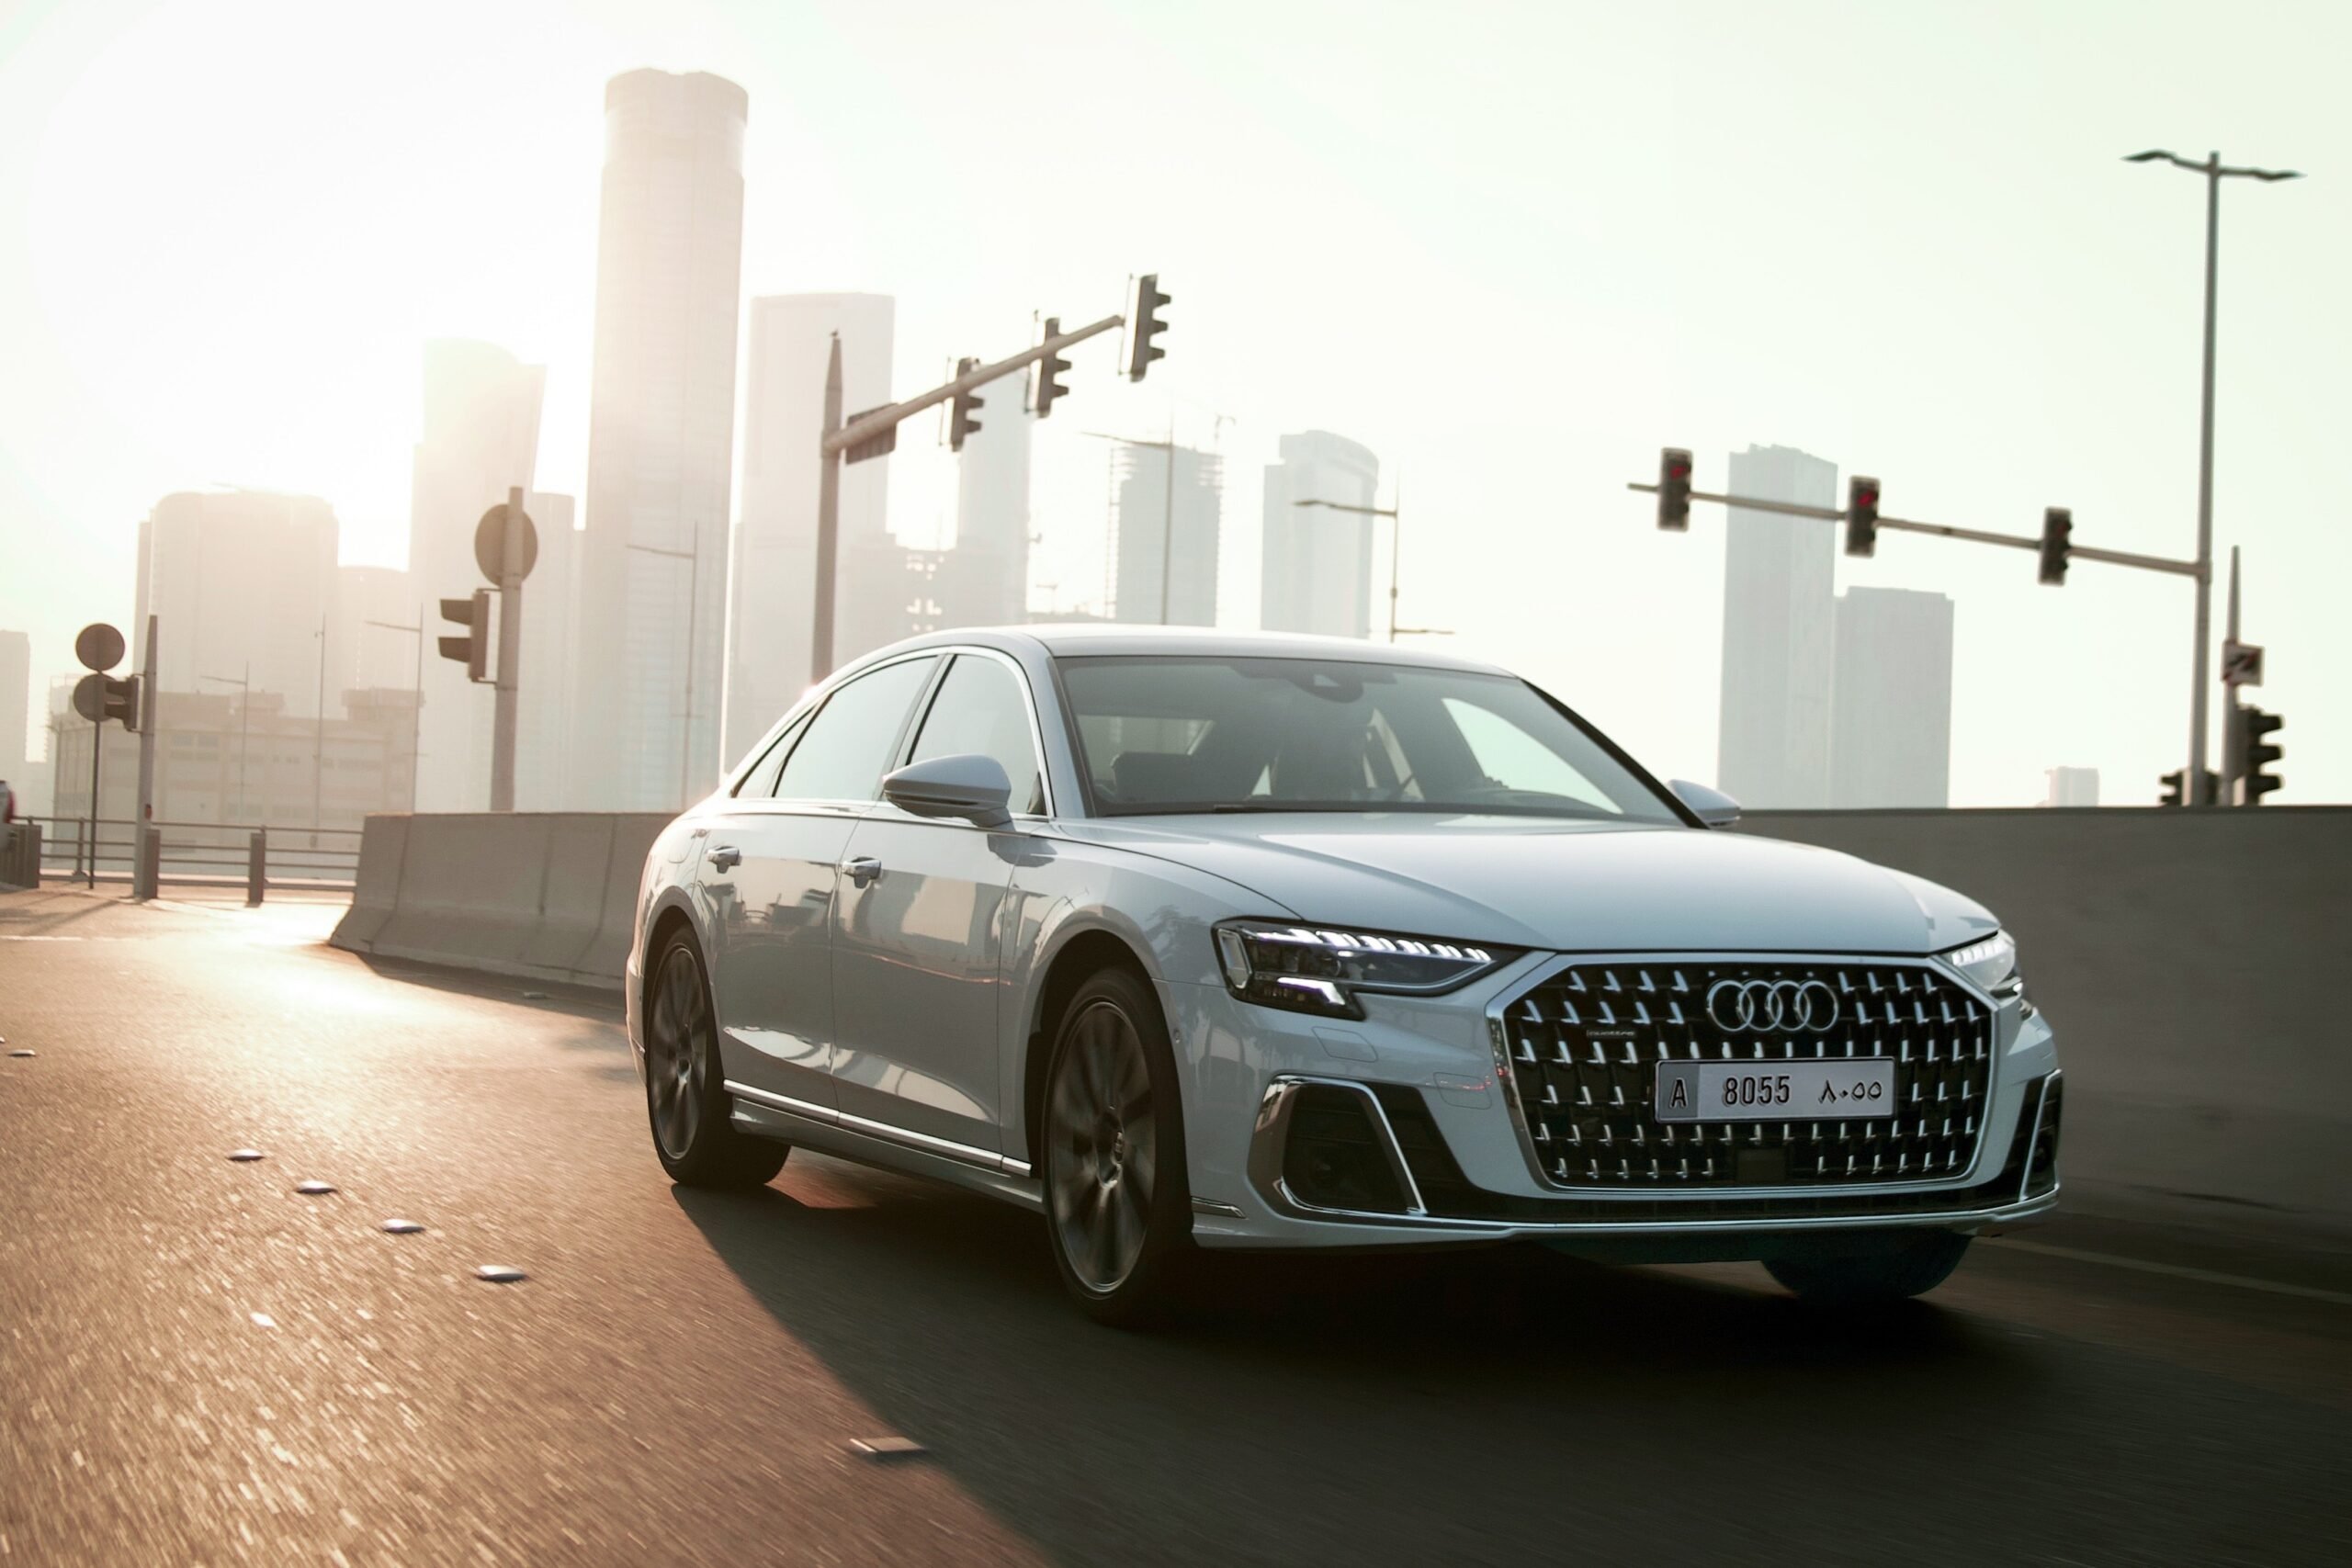 Eight for the A8: Audi Abu Dhabi offers an extended eight-year service plan on the new A8